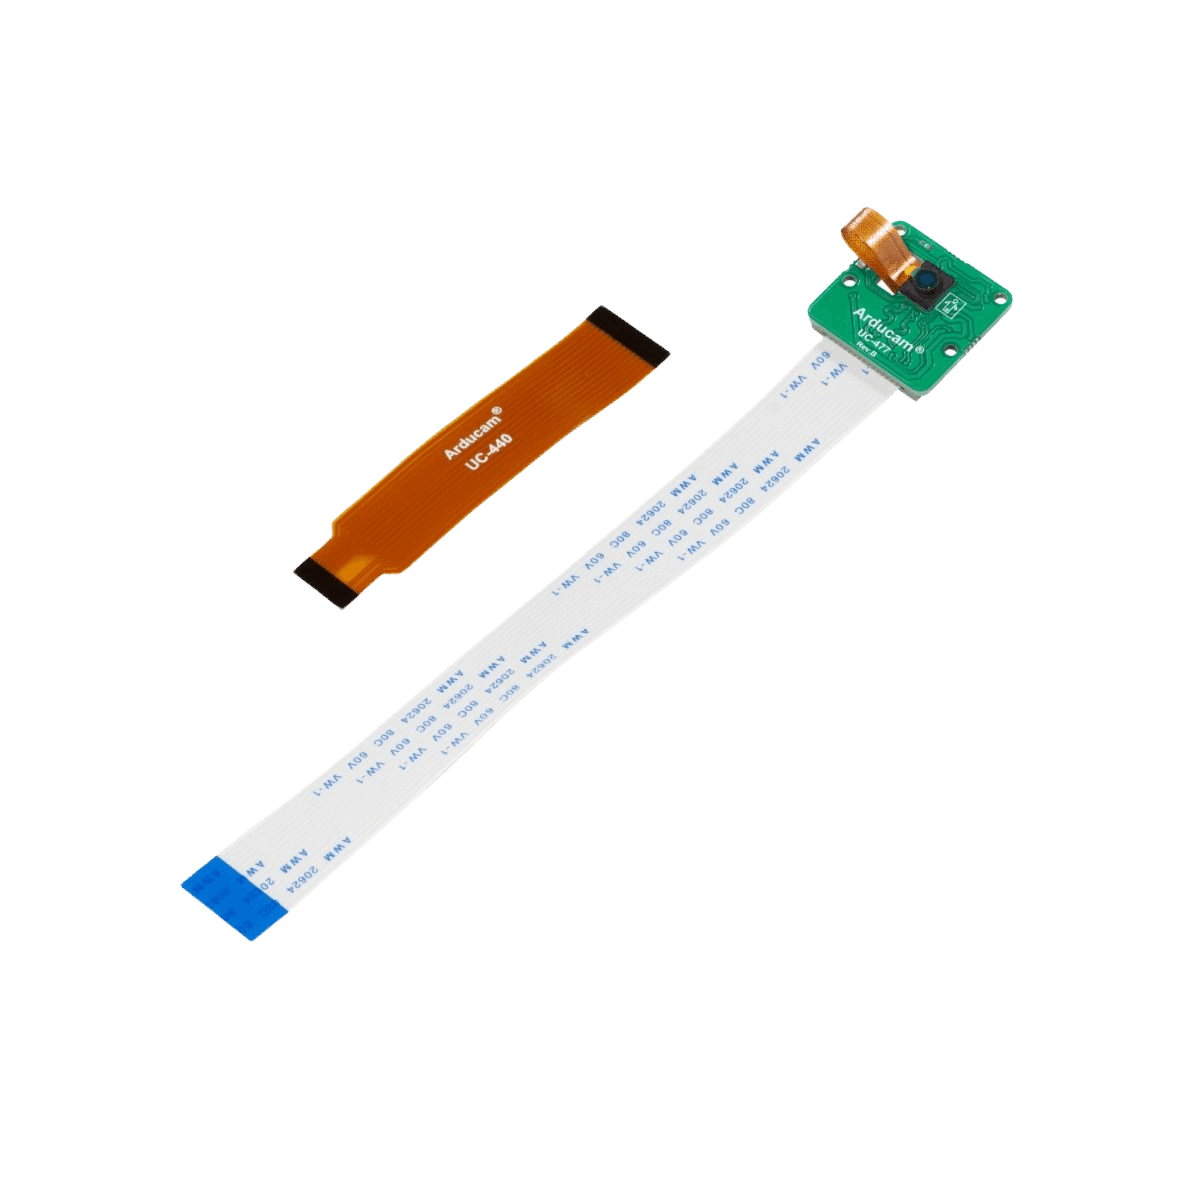 B0206 with 15-pin 1.0mm fpc cable and 15-poin to 22-pin pitch FPC cable